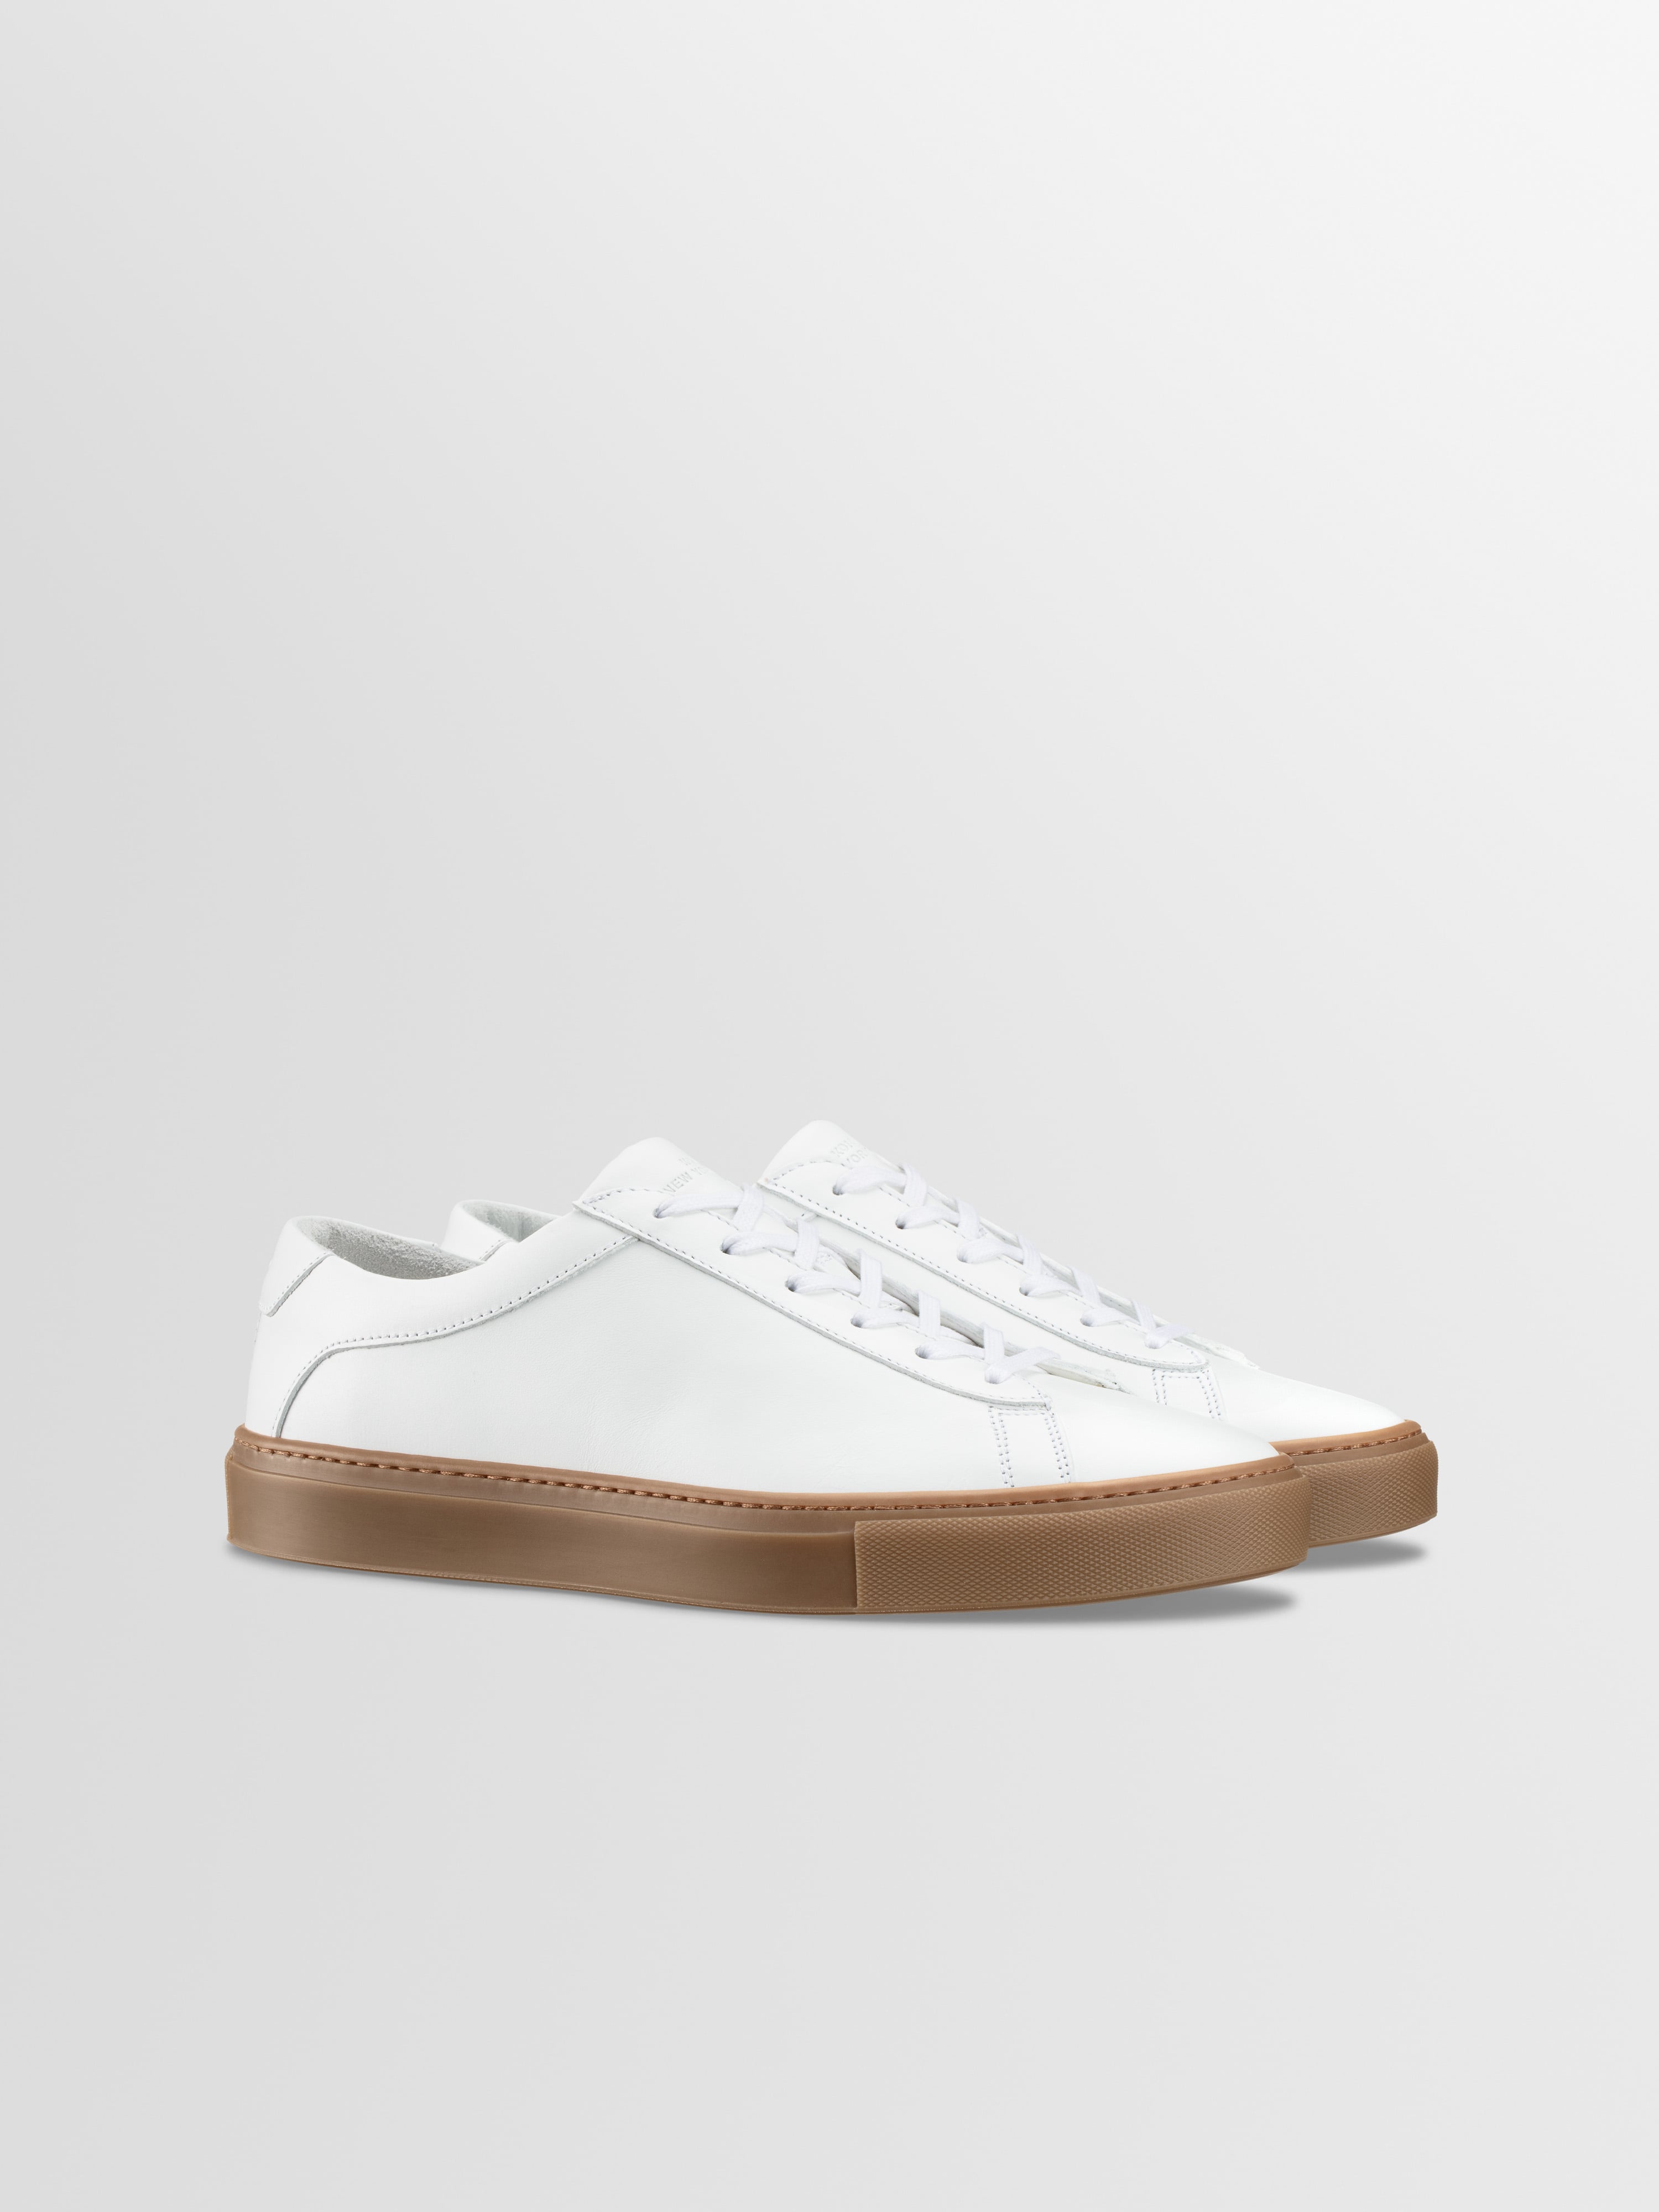 White Sneakers with Tan Rubber Soles - ANDROS by Civardi